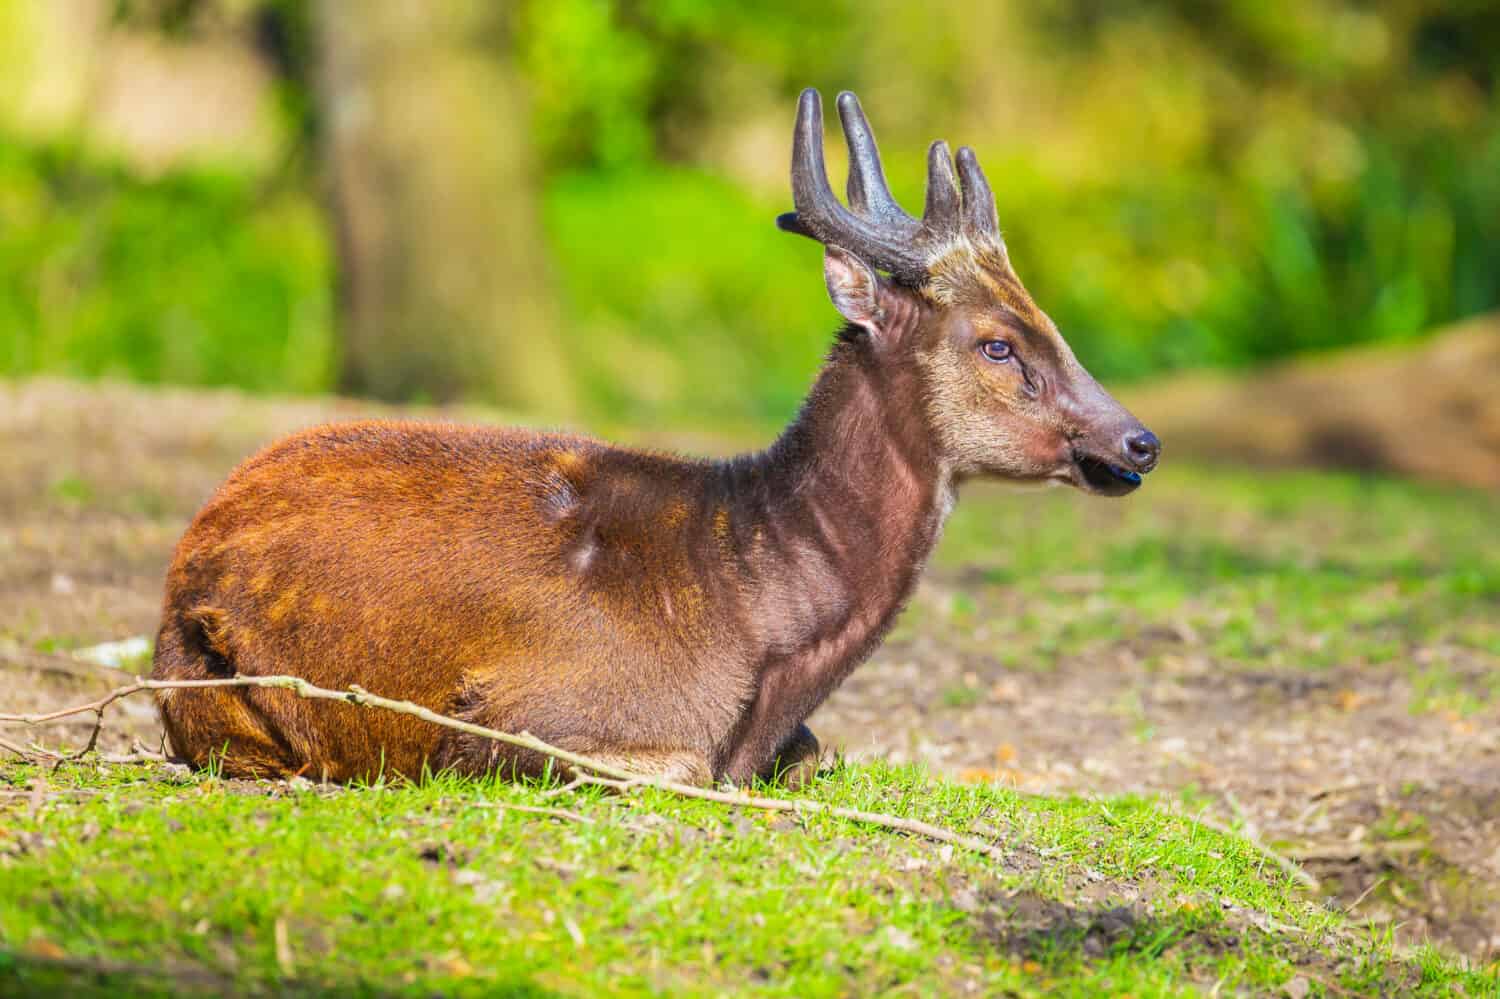 Visayan spotted deer (Rusa alfredi), also known as the Philippine spotted deer or Prince Alfred's deer